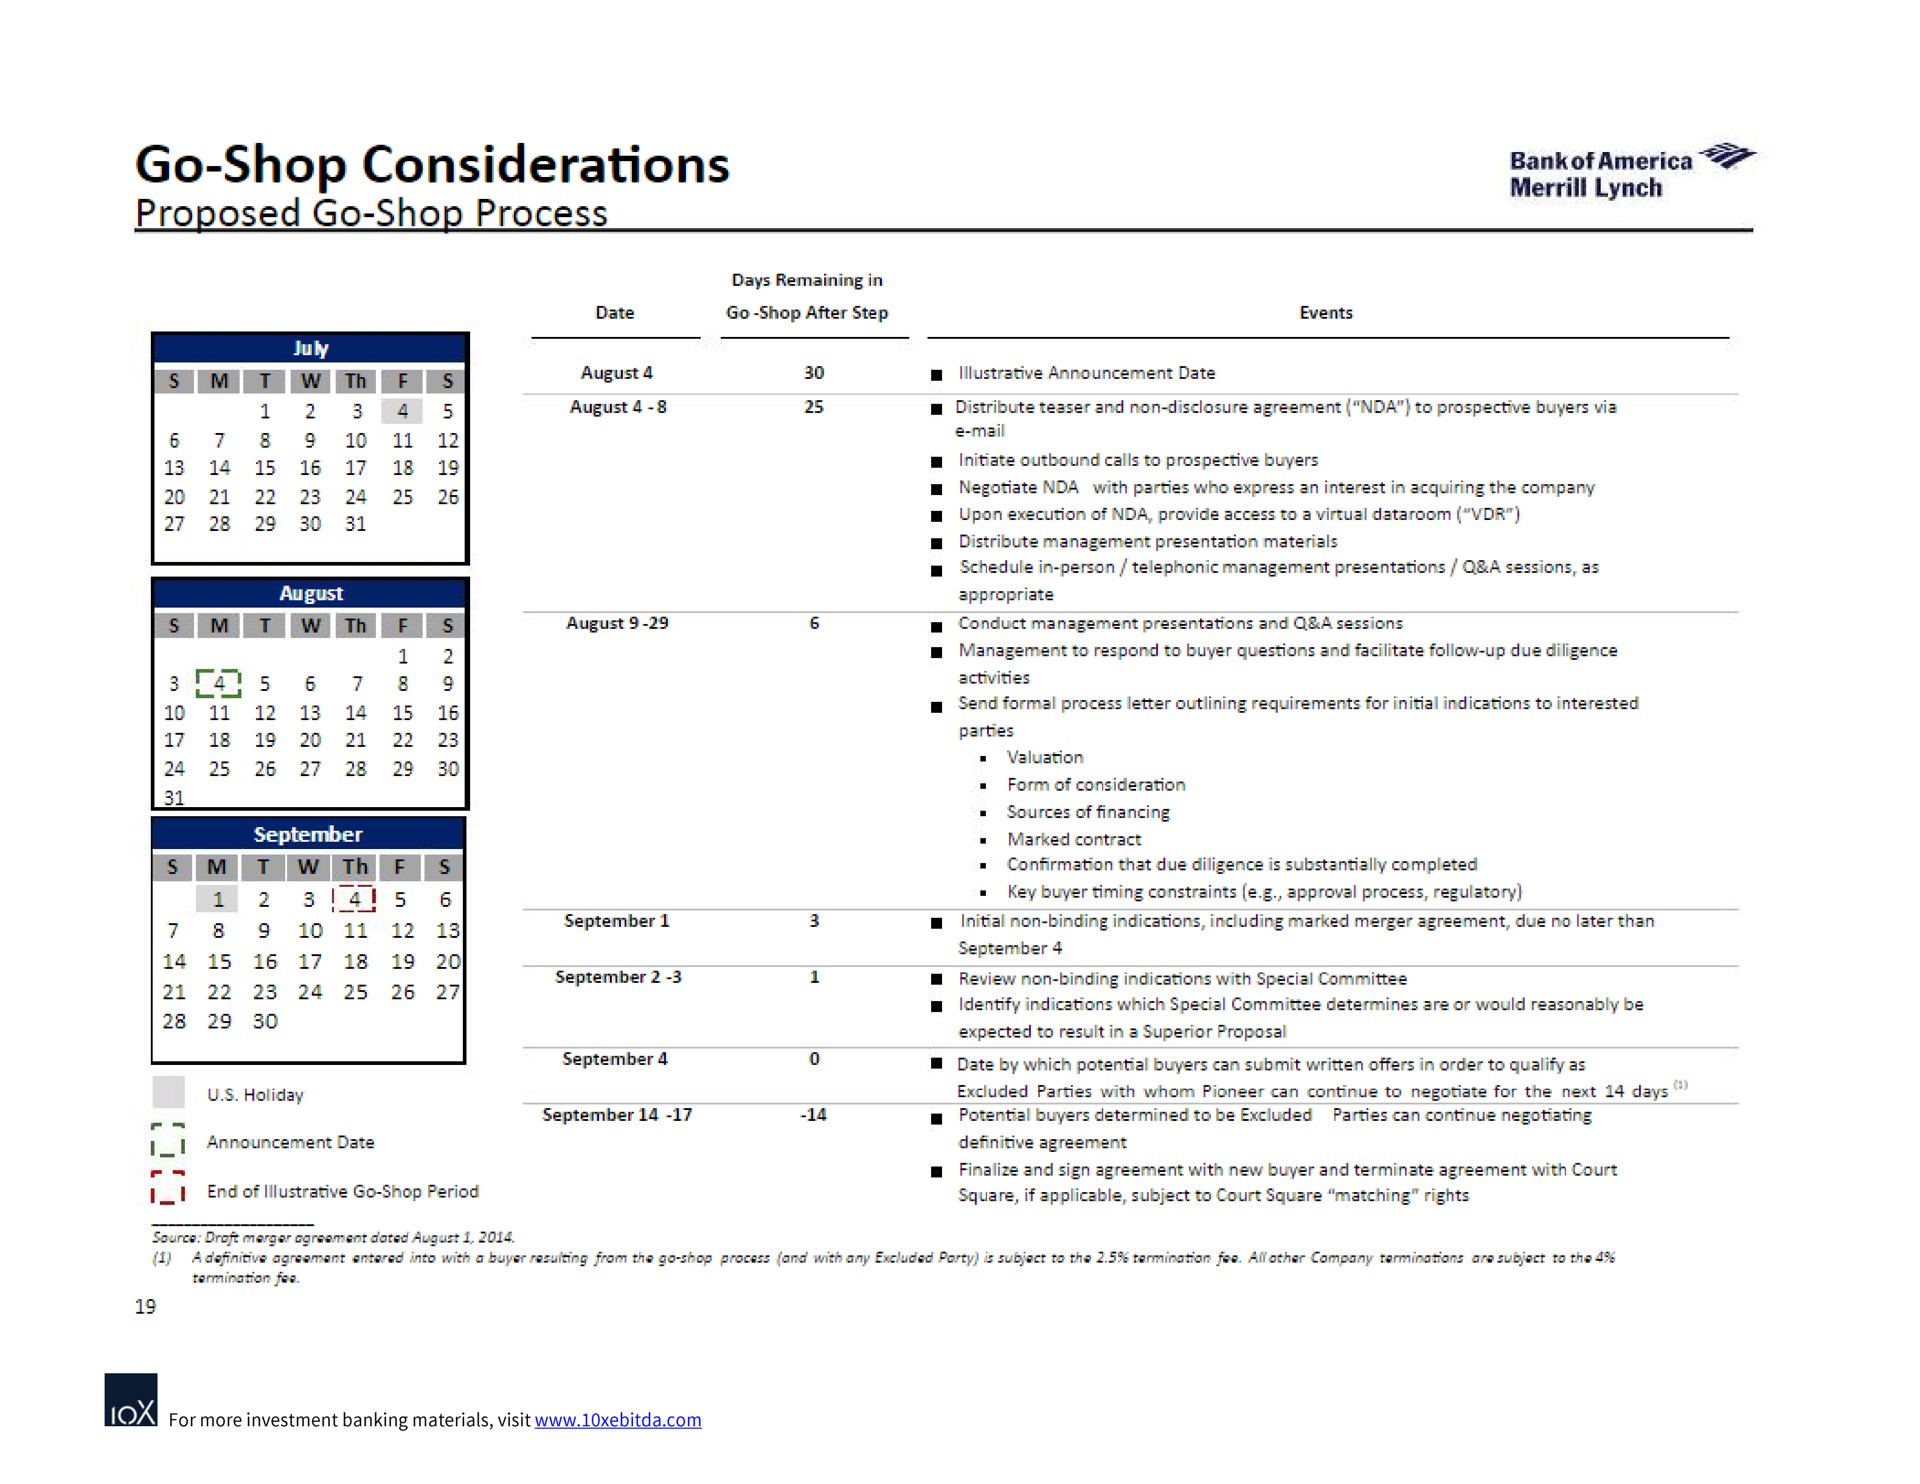 go shop considerations proposed go shop process | Bank of America